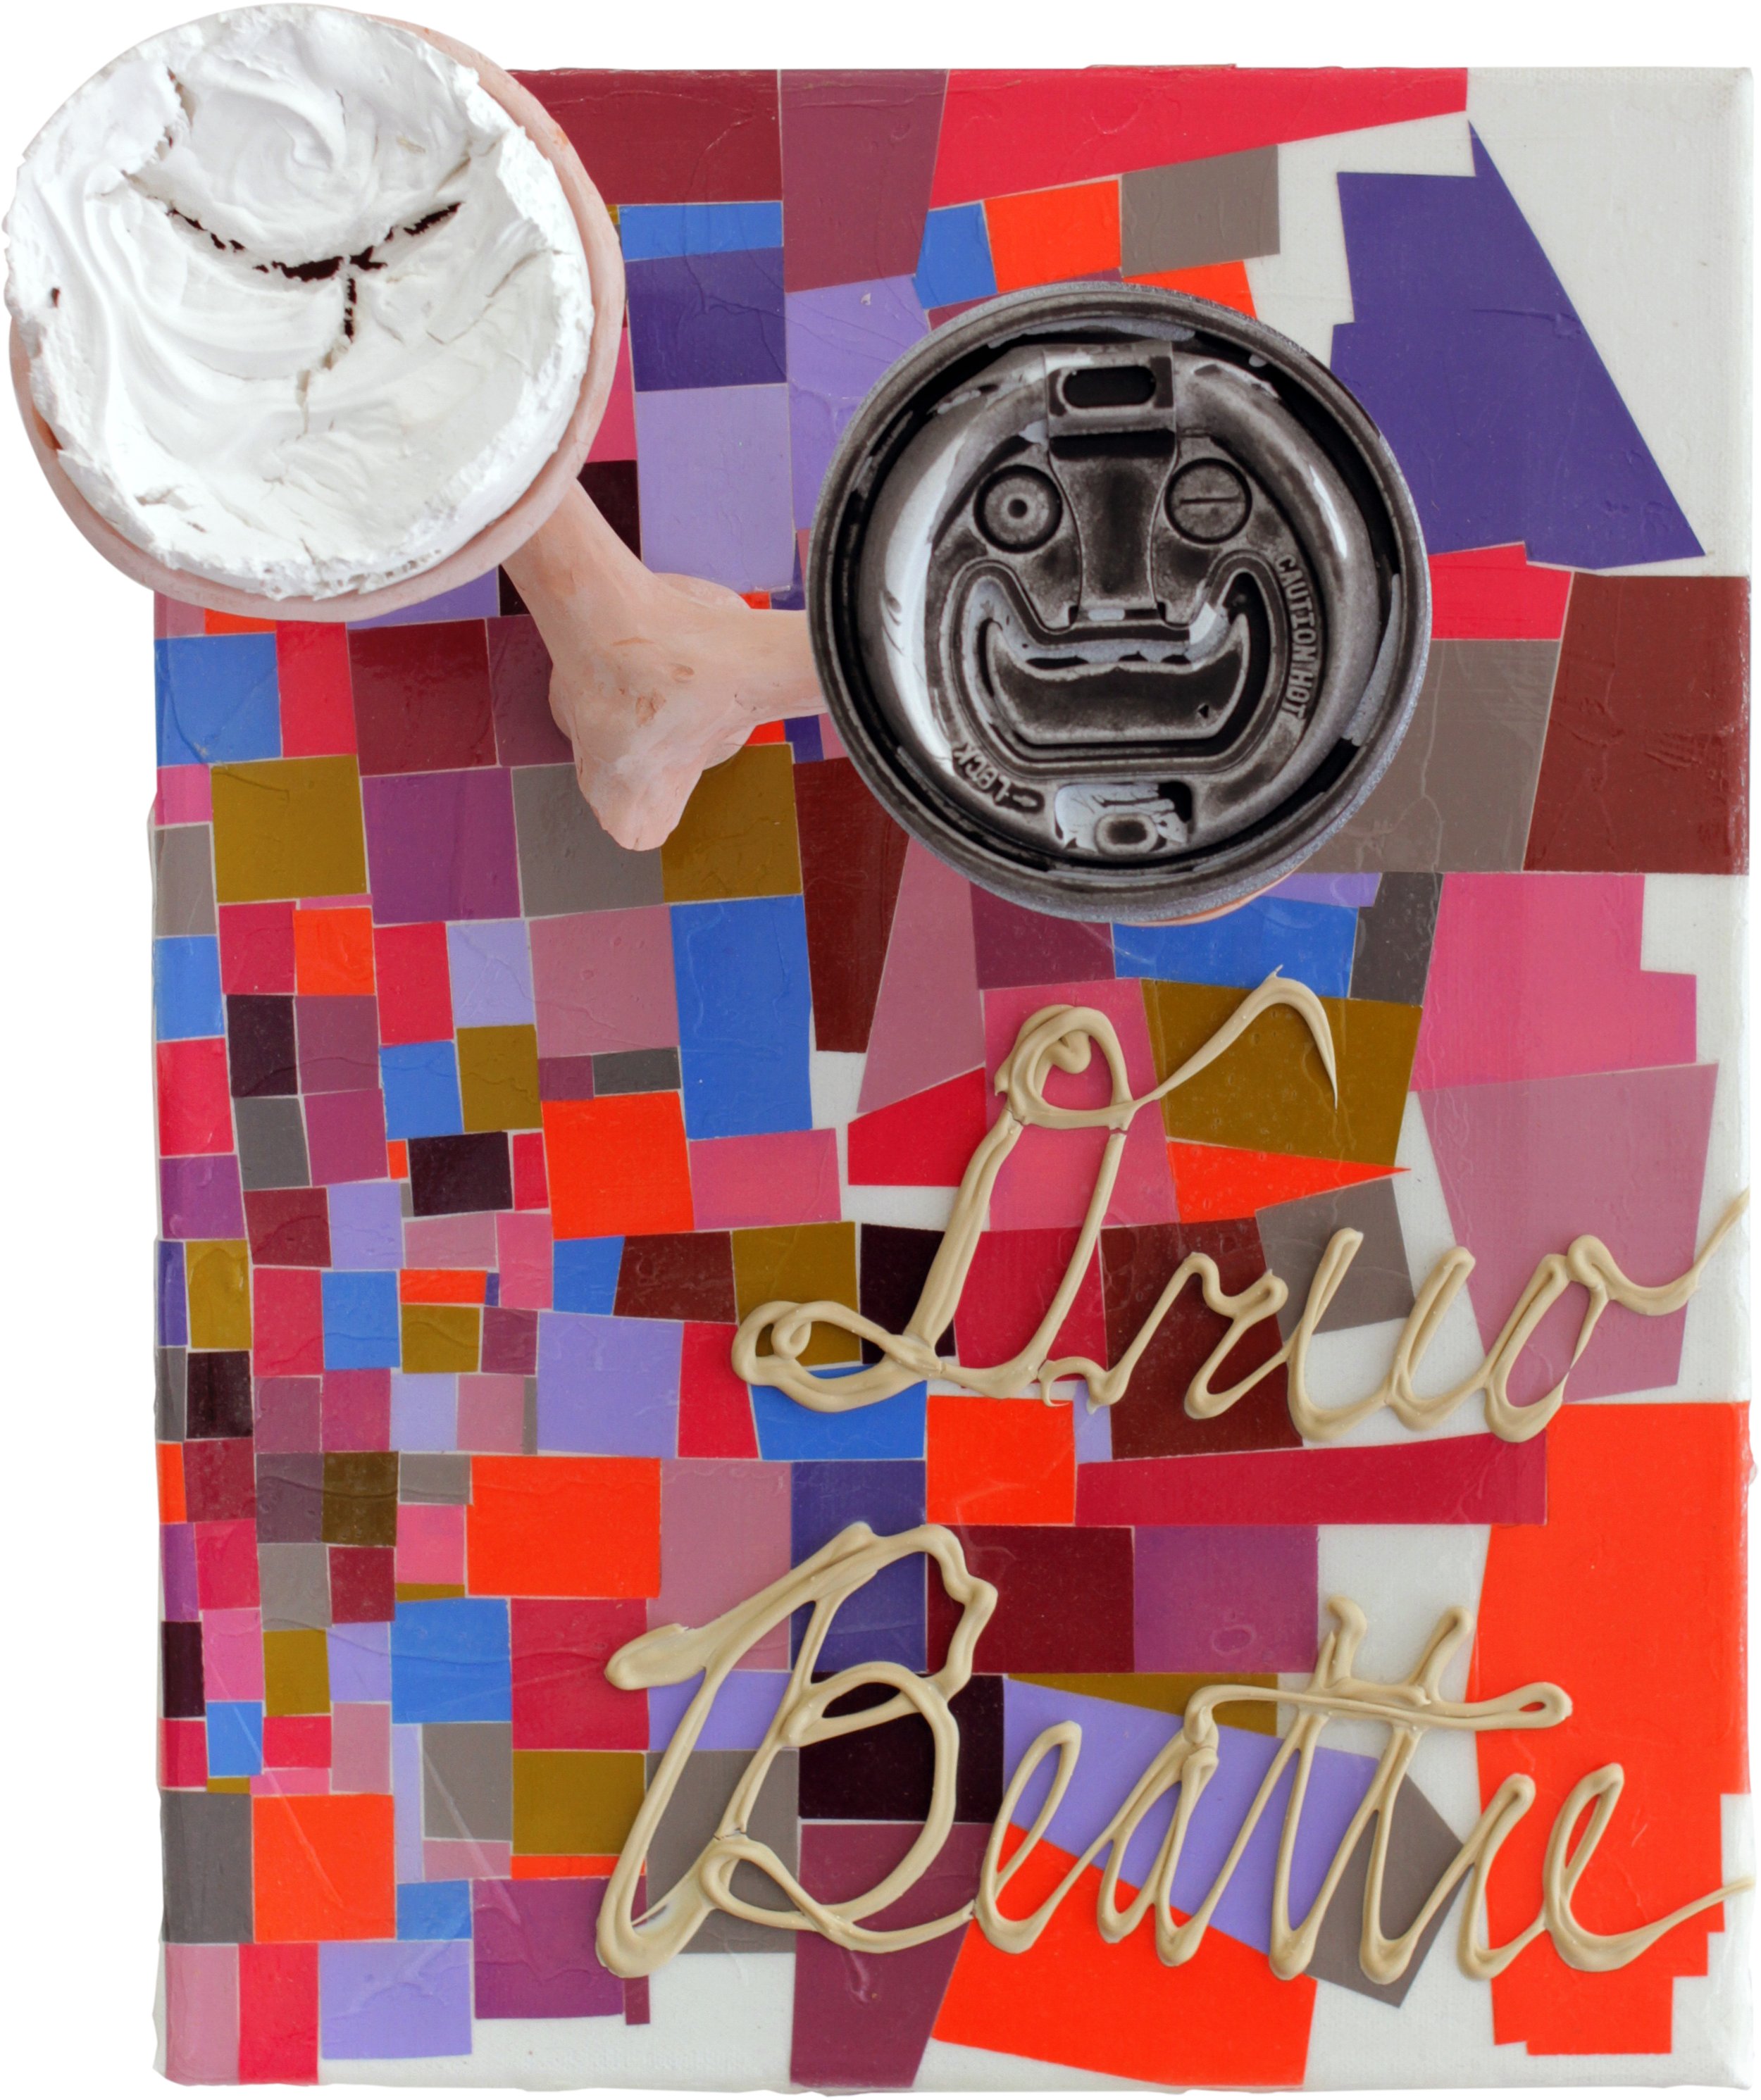  Drew Beattie  Dreetle   2012 acrylic, coffee lid, ceramic, epoxy, Liquid Nails, and cut papers on canvas 14 x 11 inches 